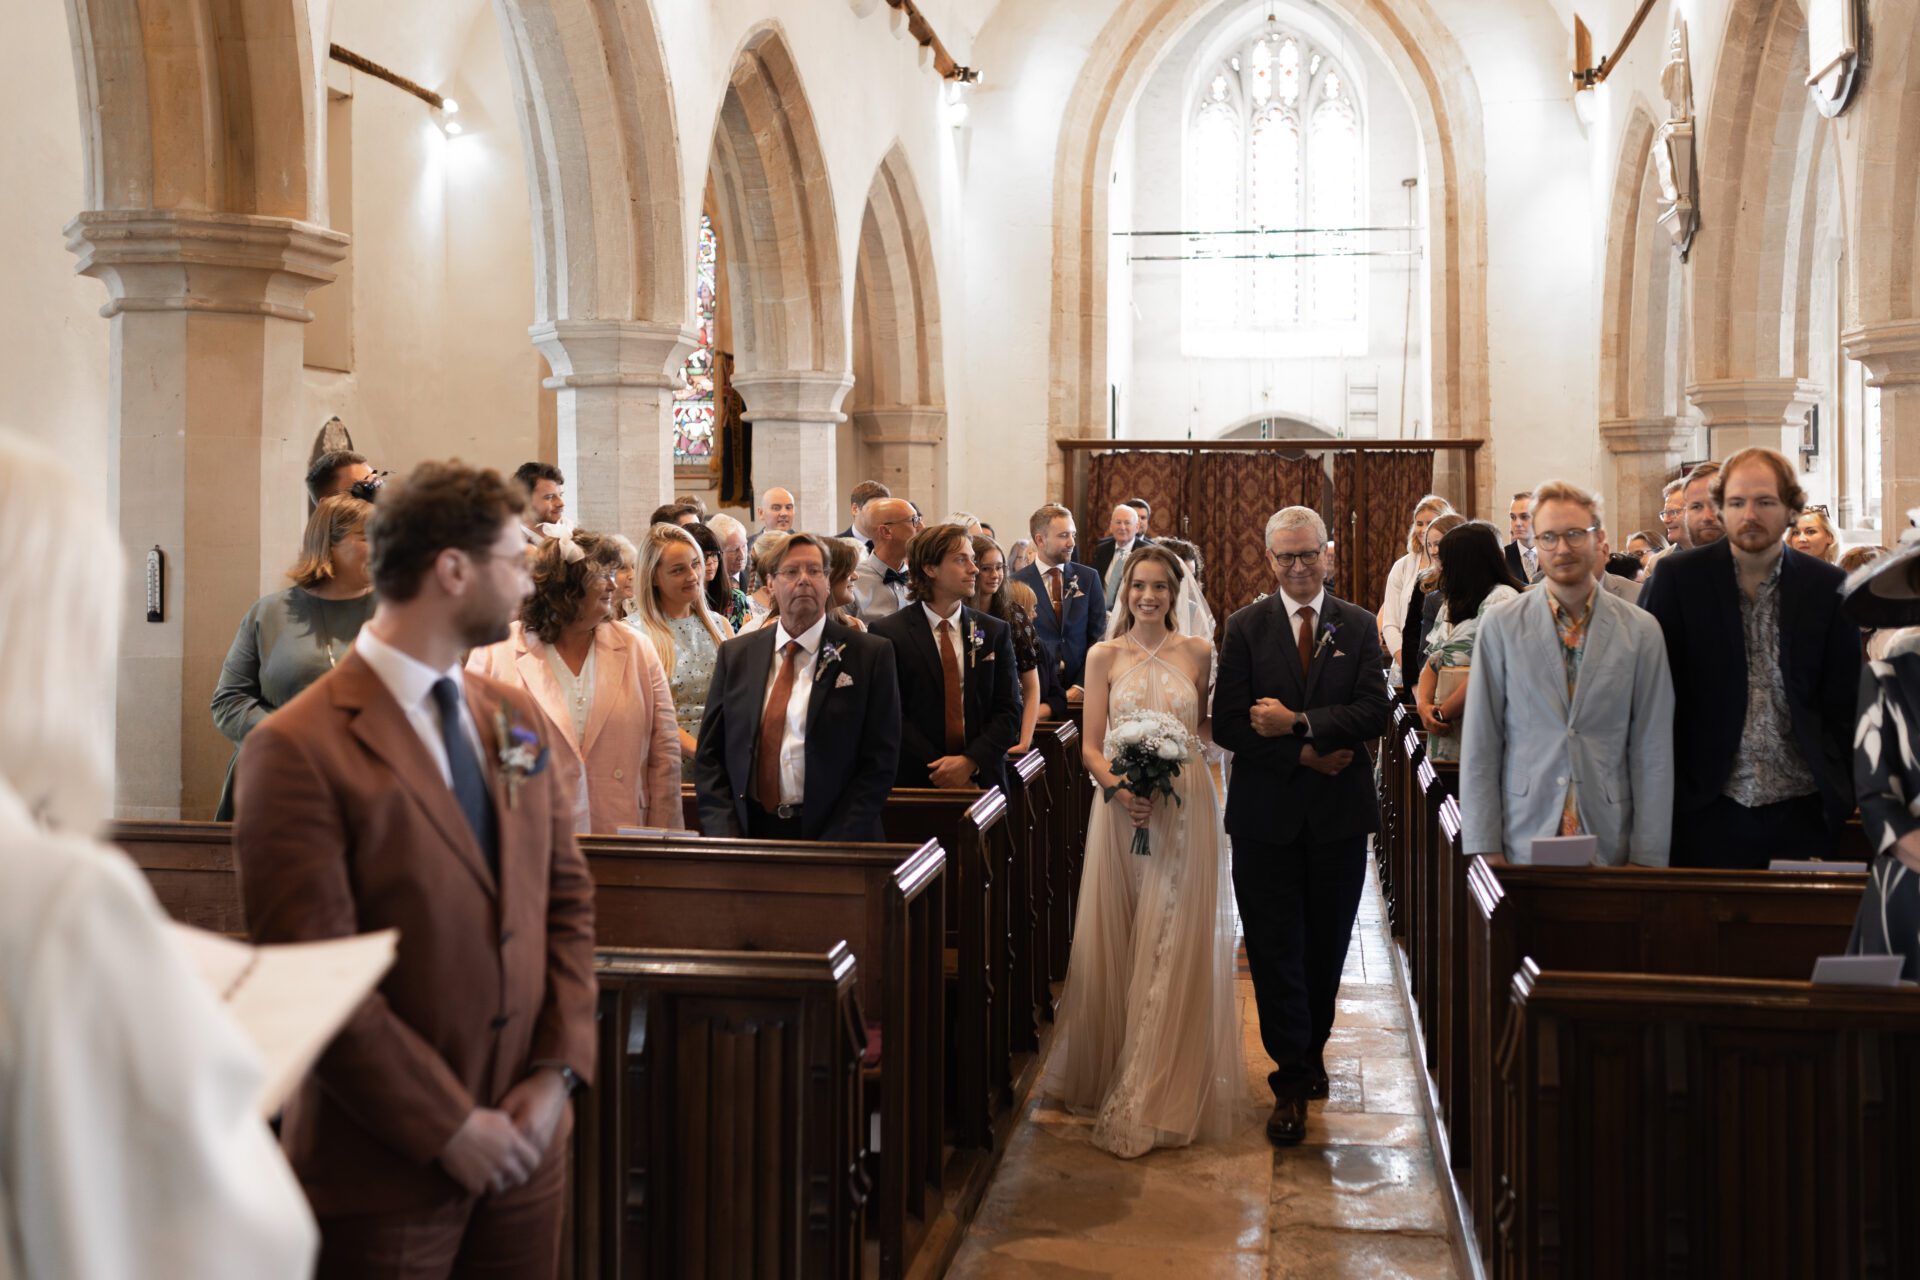 The bride walks down the aisle with her father for her Gloucestershire wedding